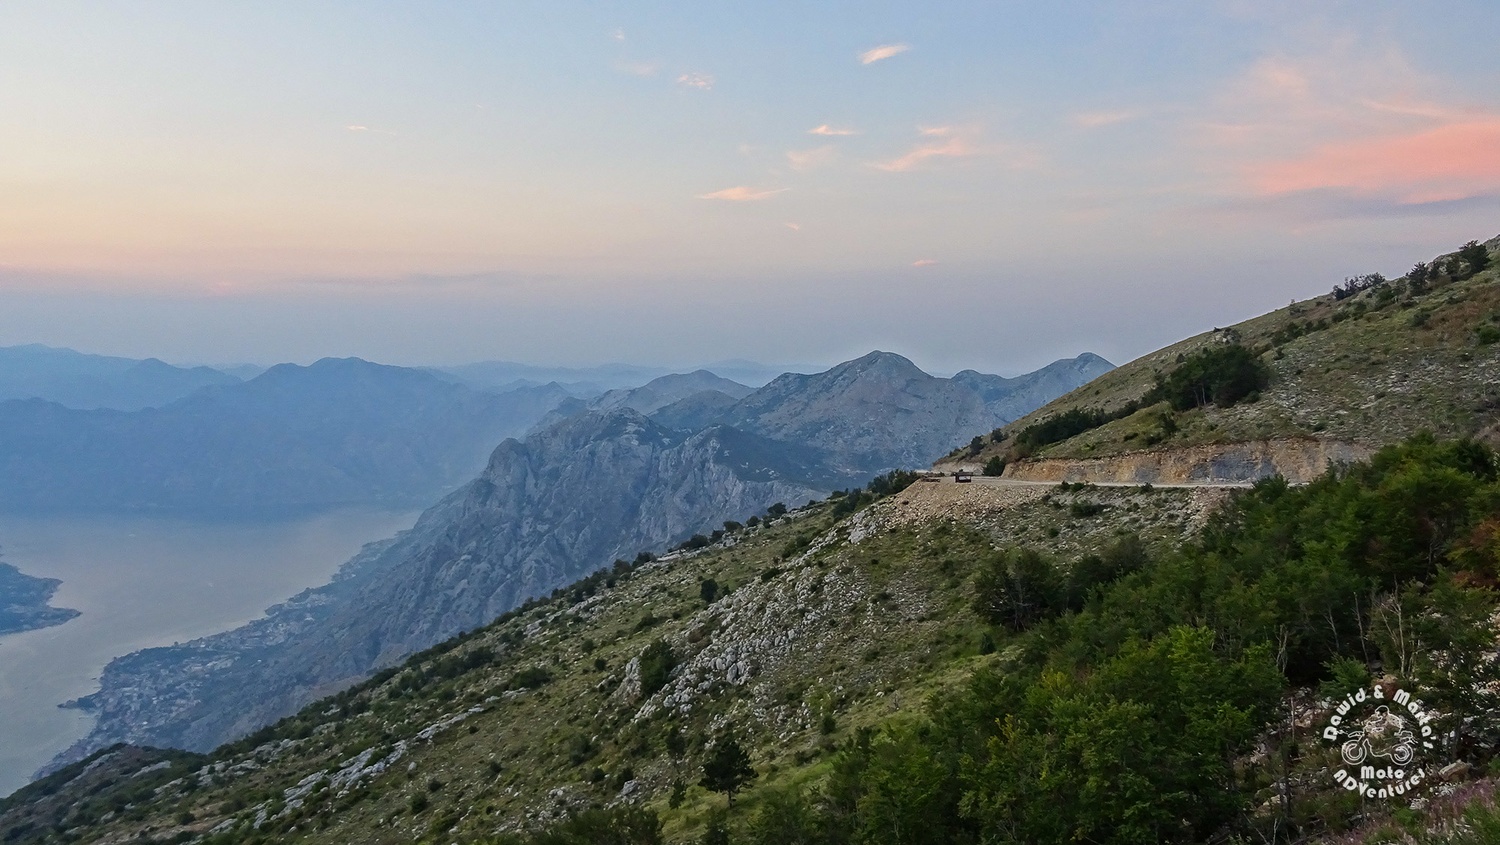 The road to the Lovcen National Park seen from the viewpoint on the Kotor Bay